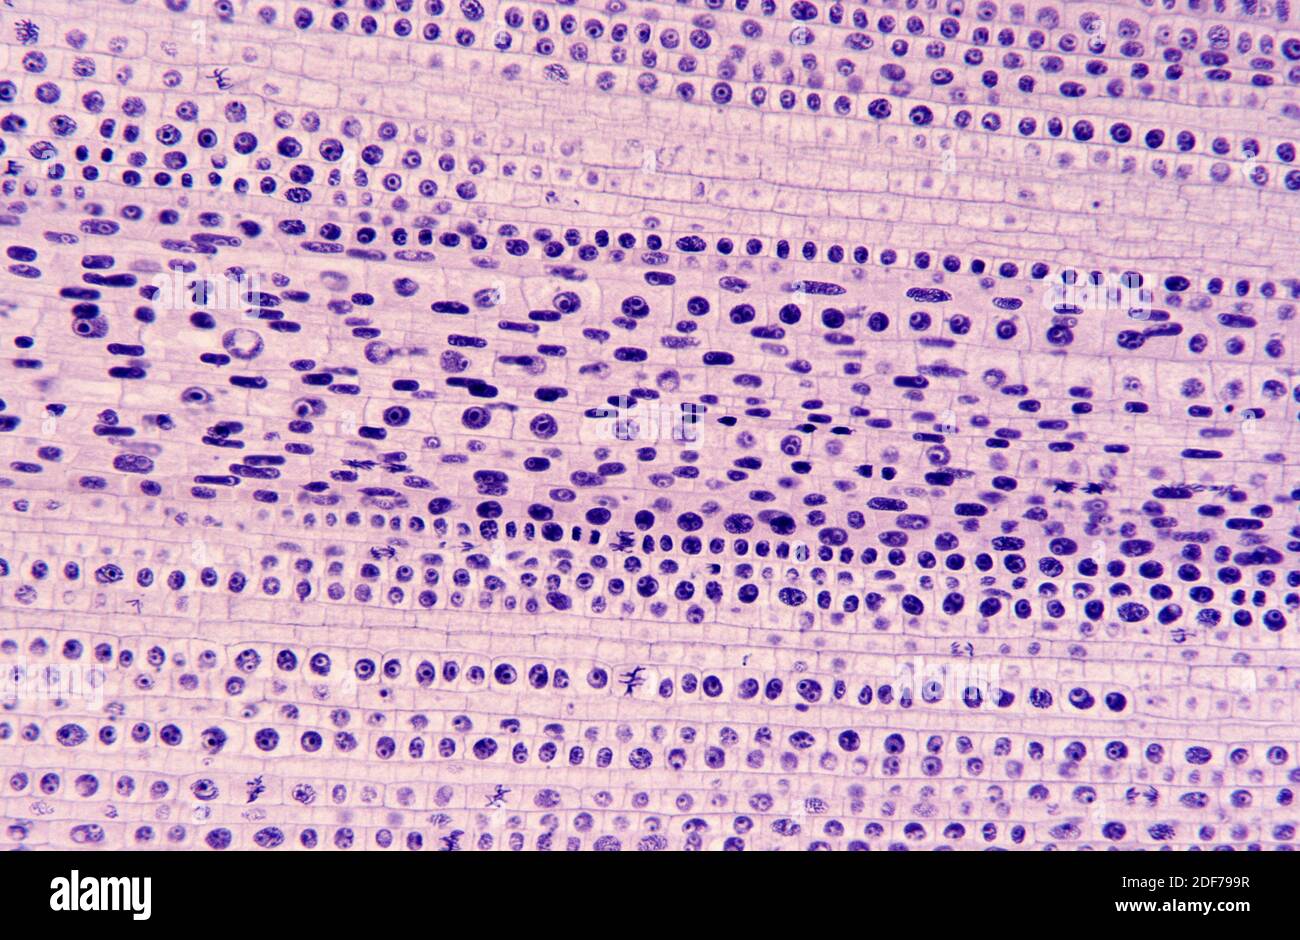 Root apical meristem showing cell divisions (mitosis). Onion root photomicrograph. Stock Photo